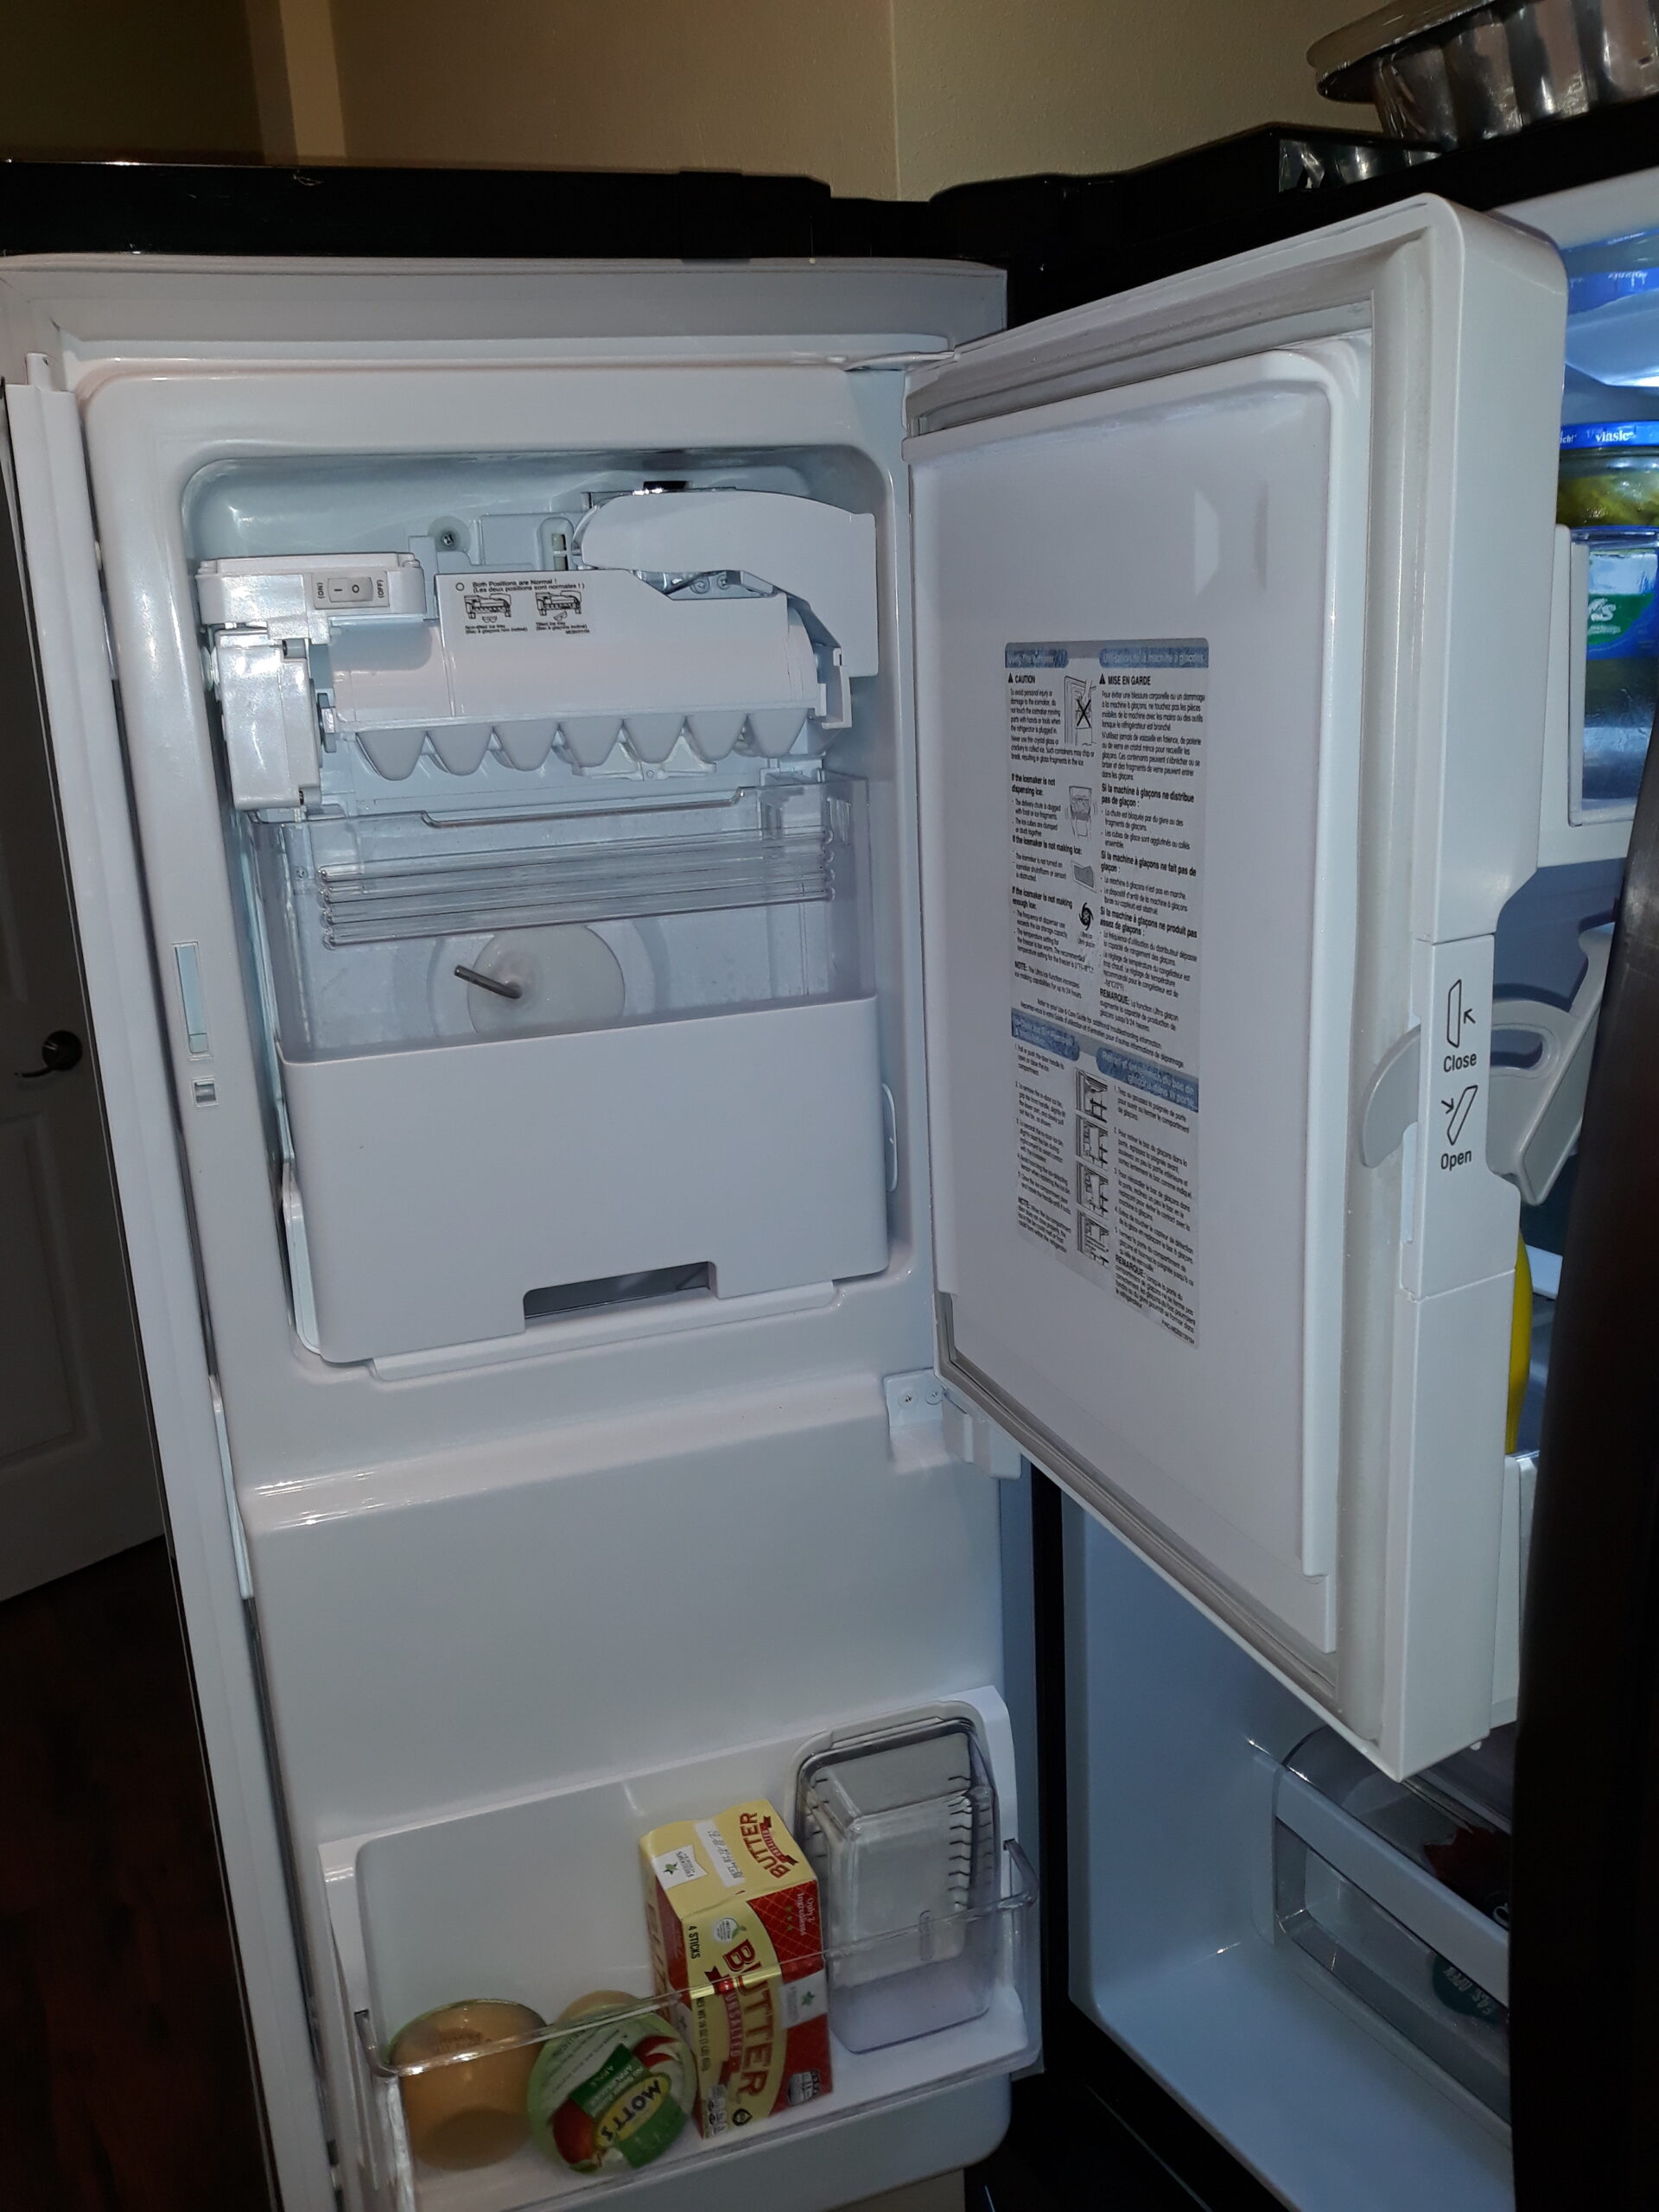 appliance repair refrigerator repair replacement of the ice maker assembly due to hard water calcium deposits w church st orlovista orlando fl 32835